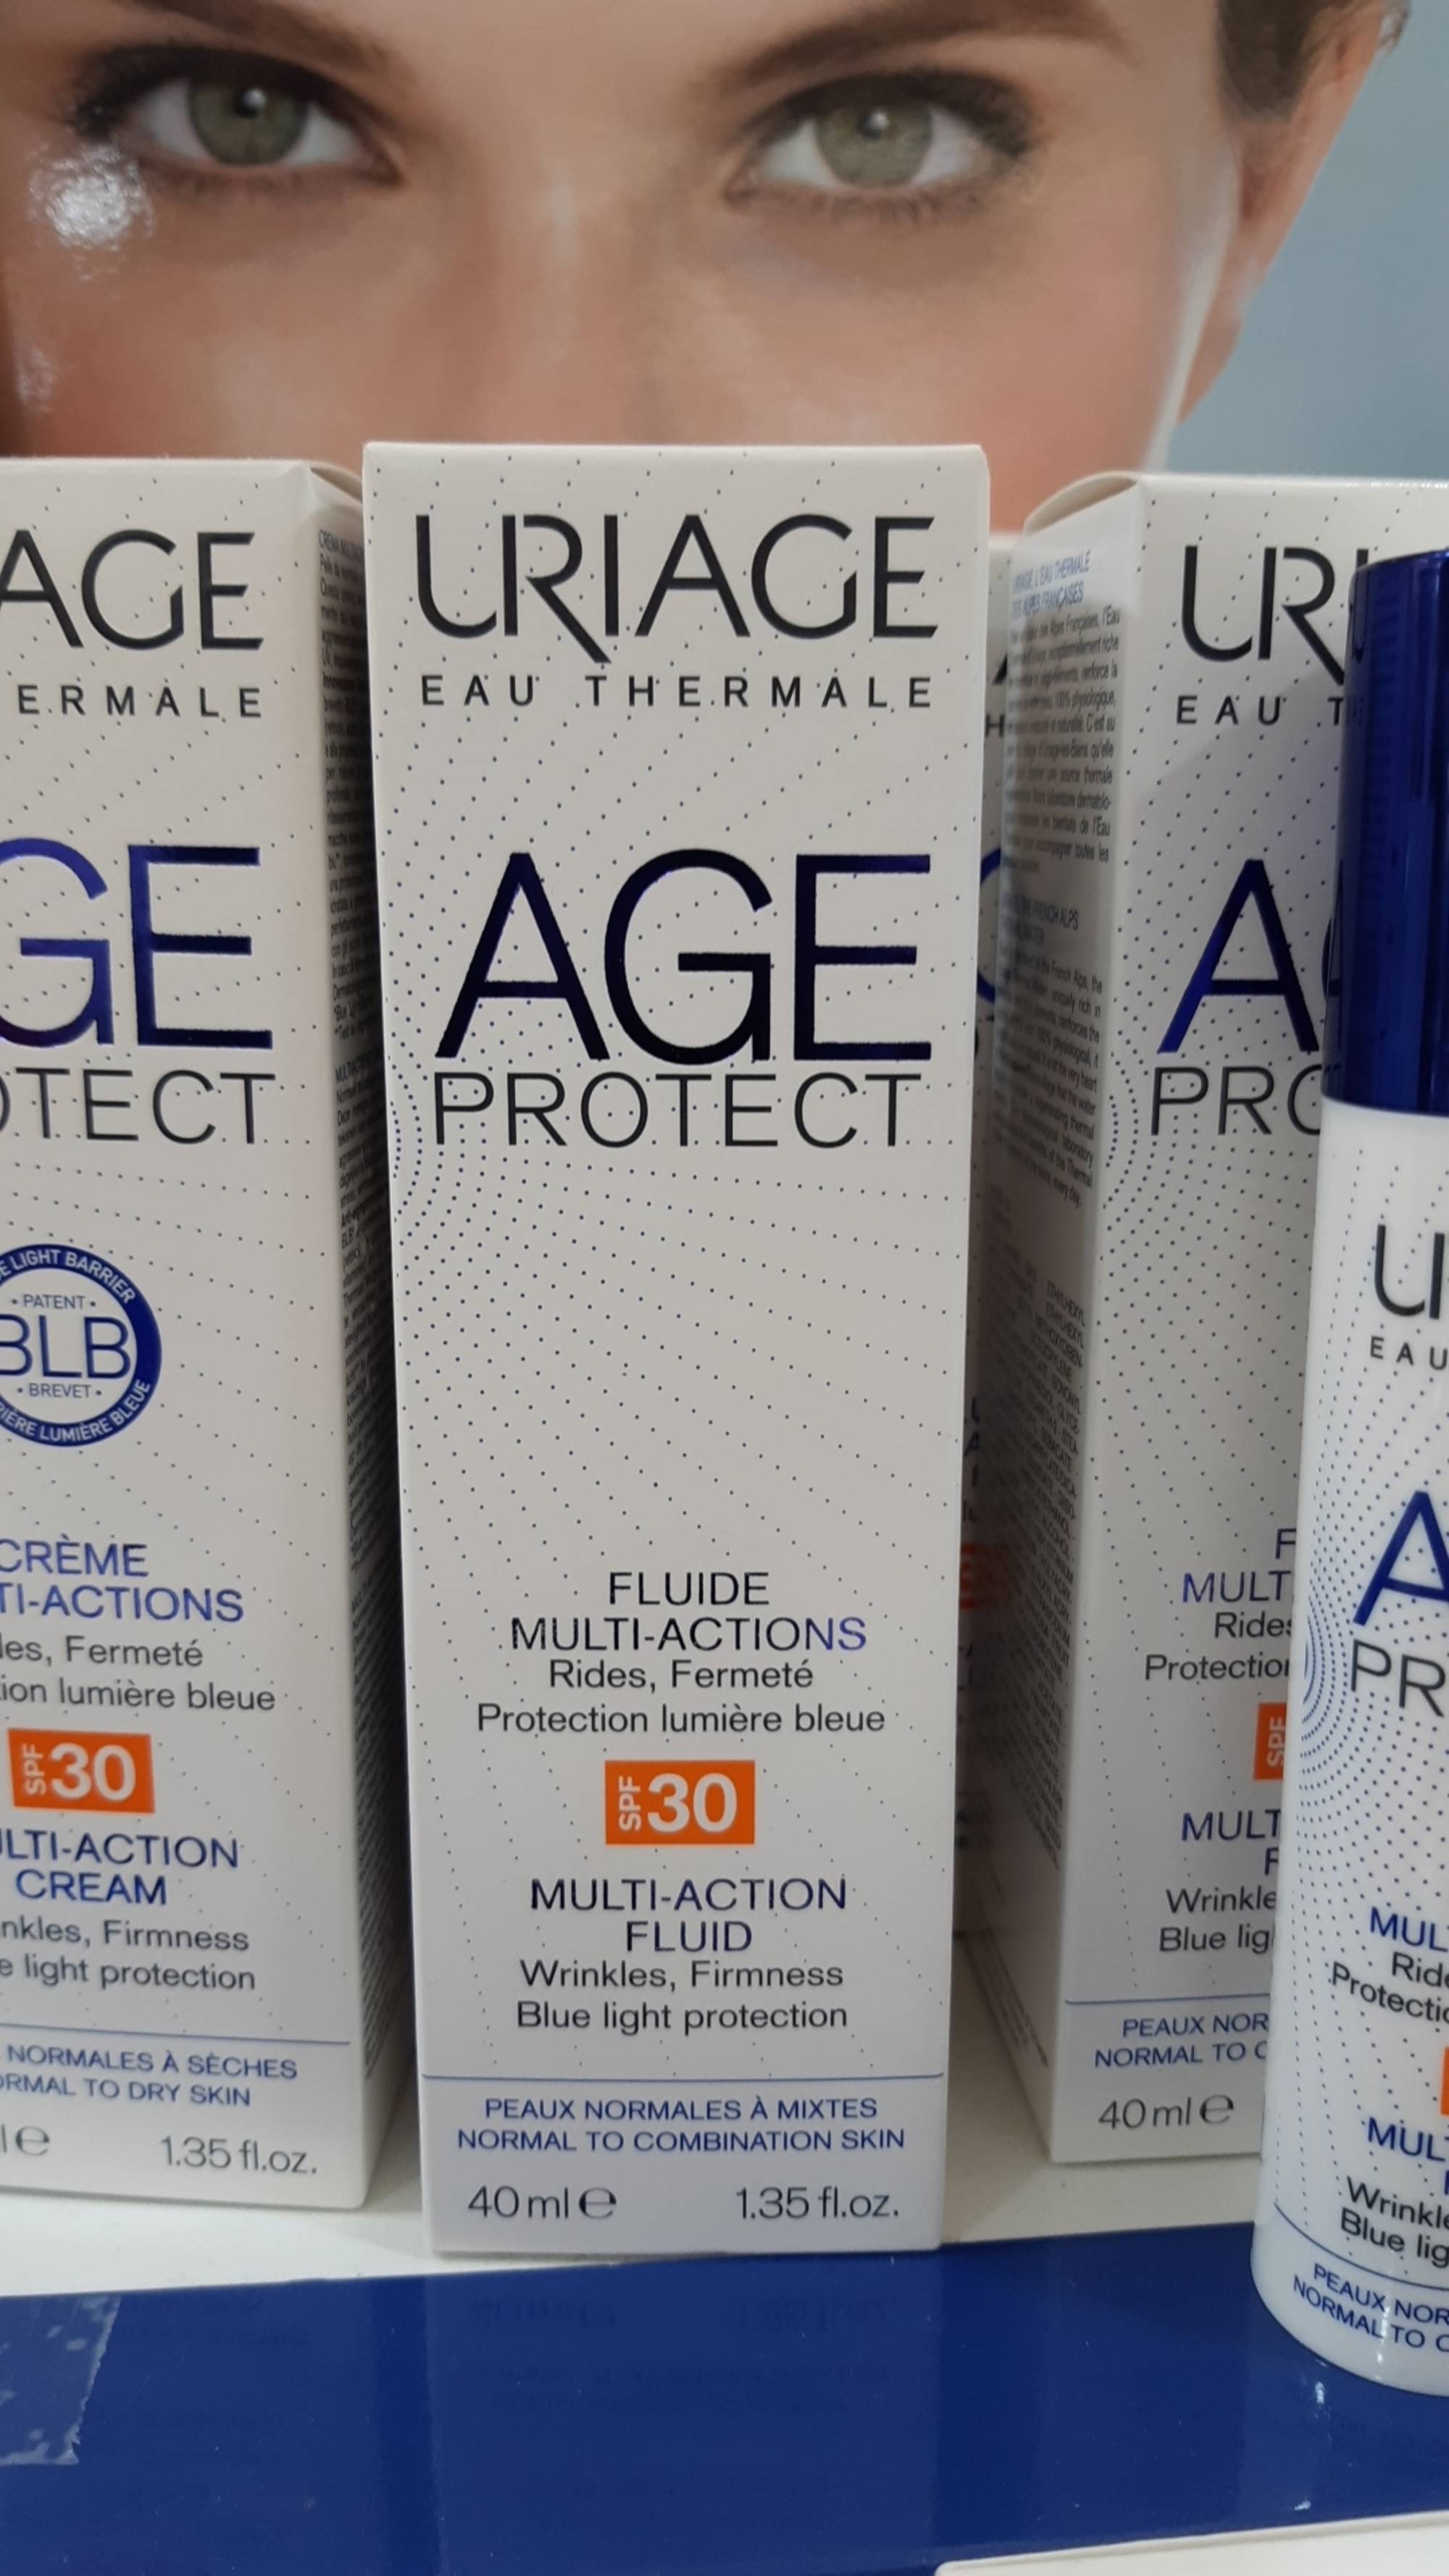 URIAGE - Age protect - Fluide multi-actions SPF 30